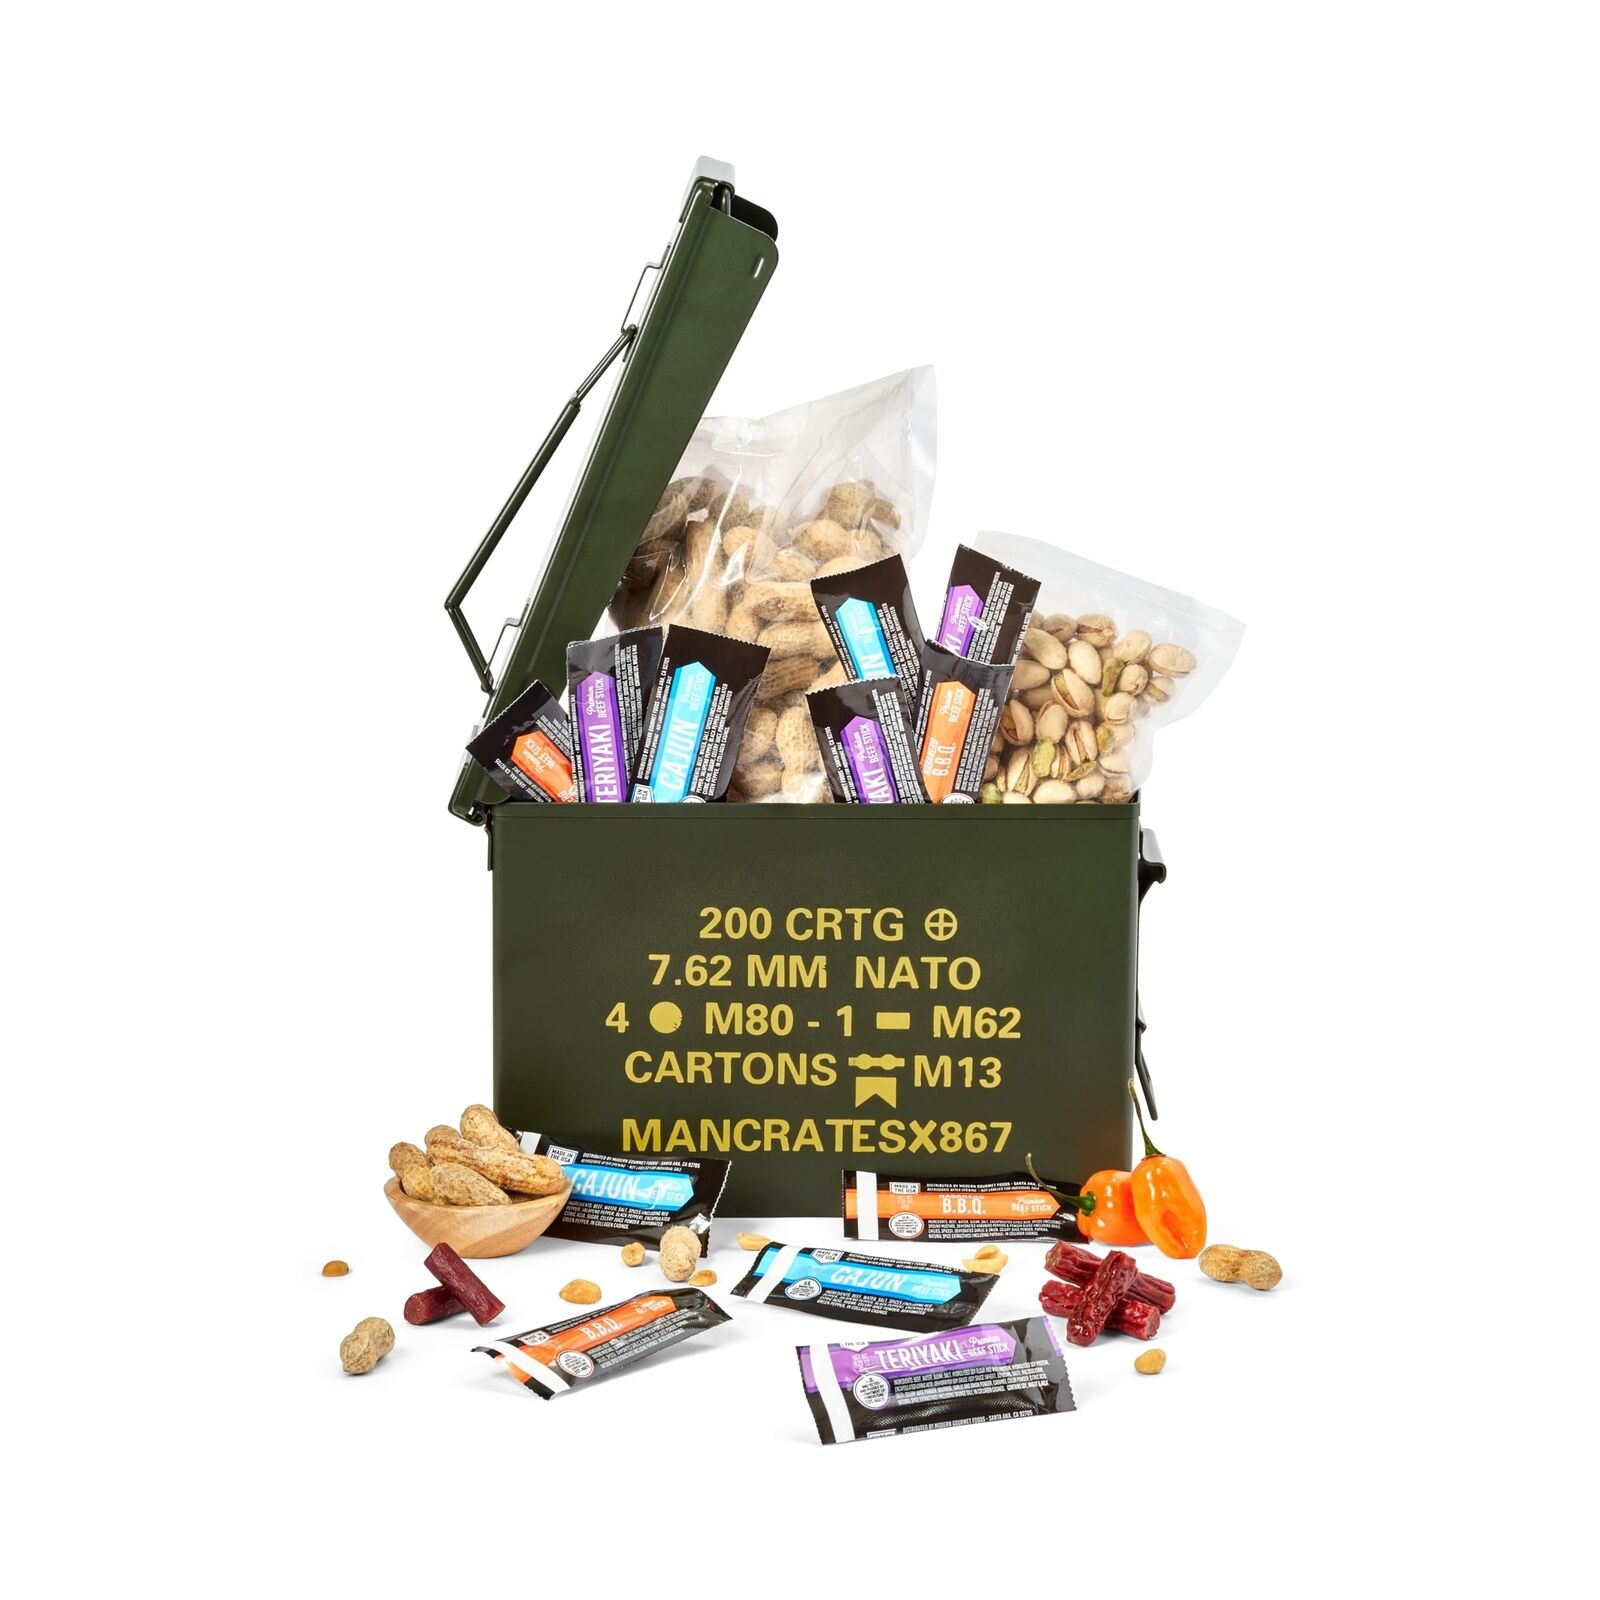 Man Crates Premium Snack-munition Ammo Can – Includes 3 Meat Stick Flavors